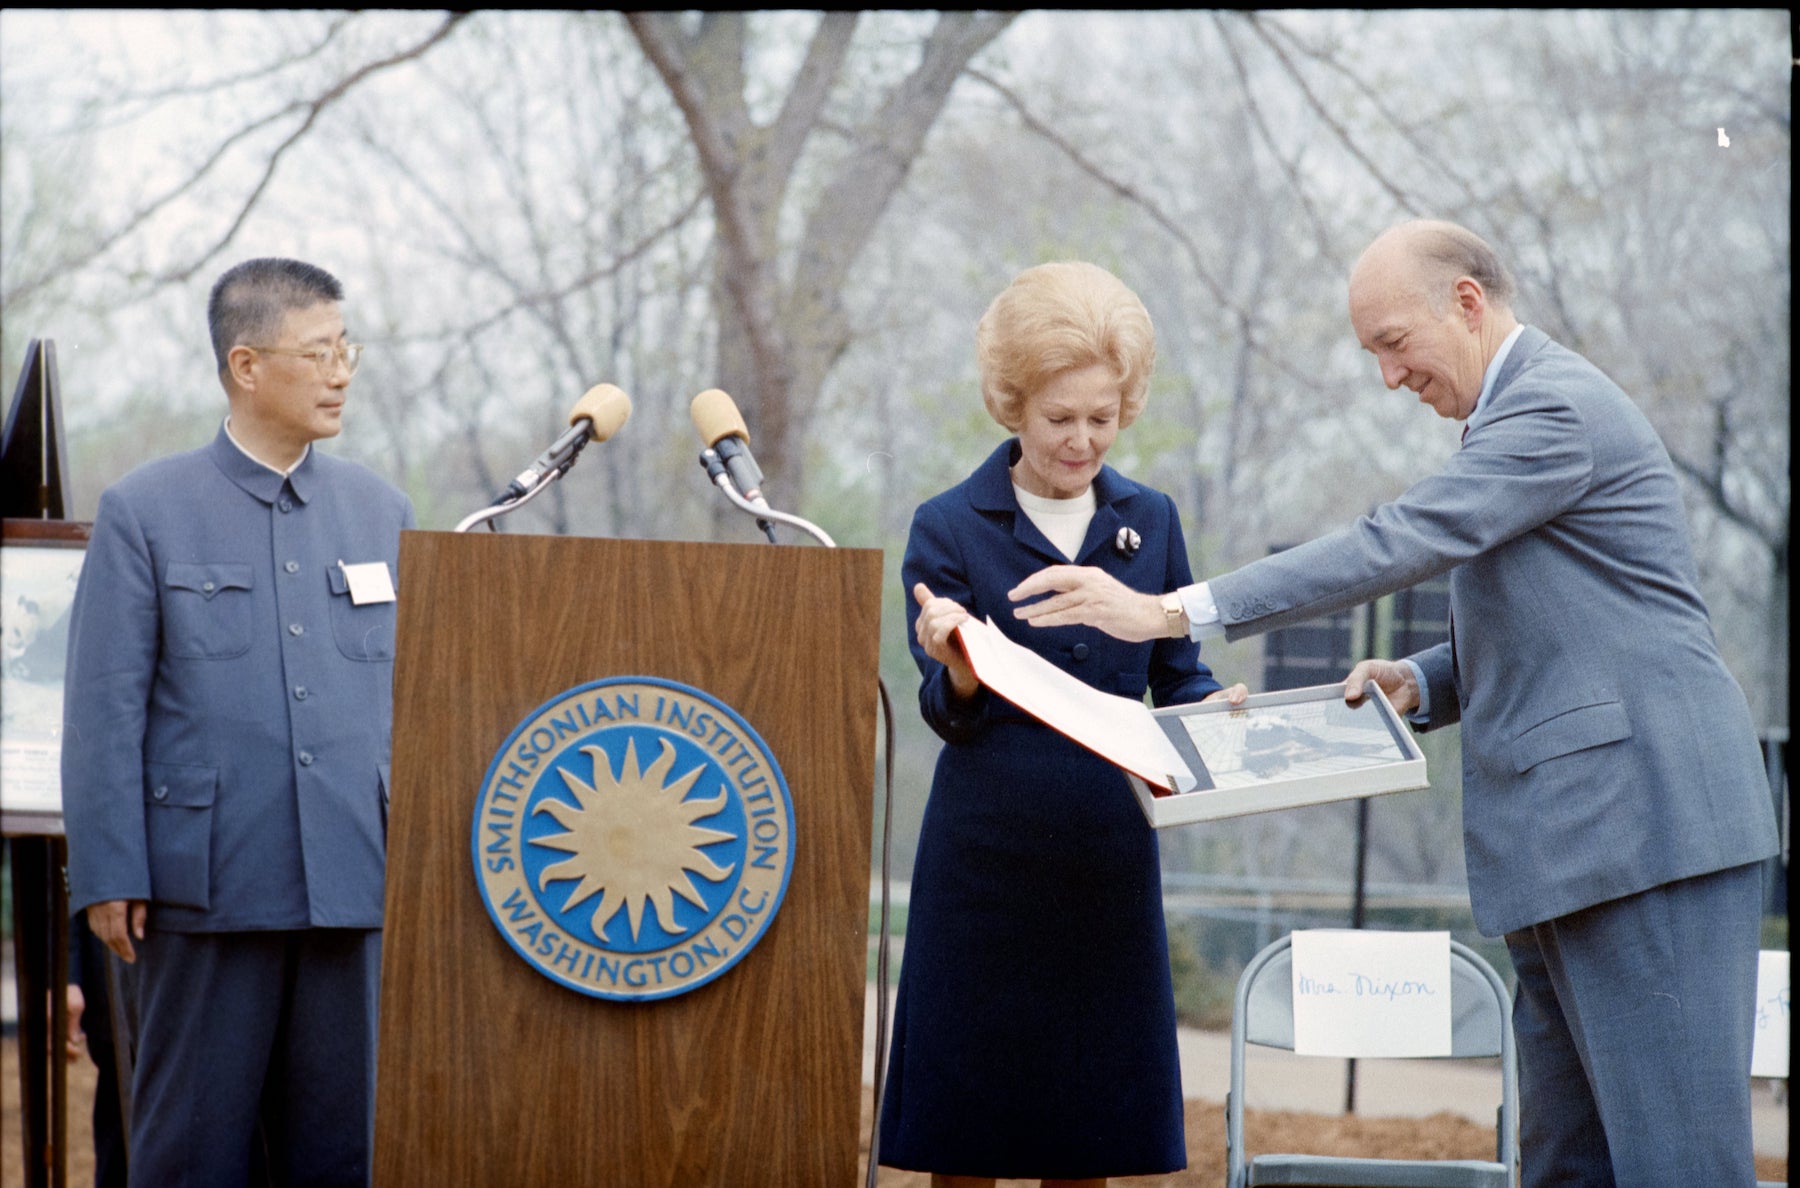 A white man and woman open a photo album of pandas by a podium with the Smithsonian's logo on it. A Chinese man stands behind the podium, looking at the others.